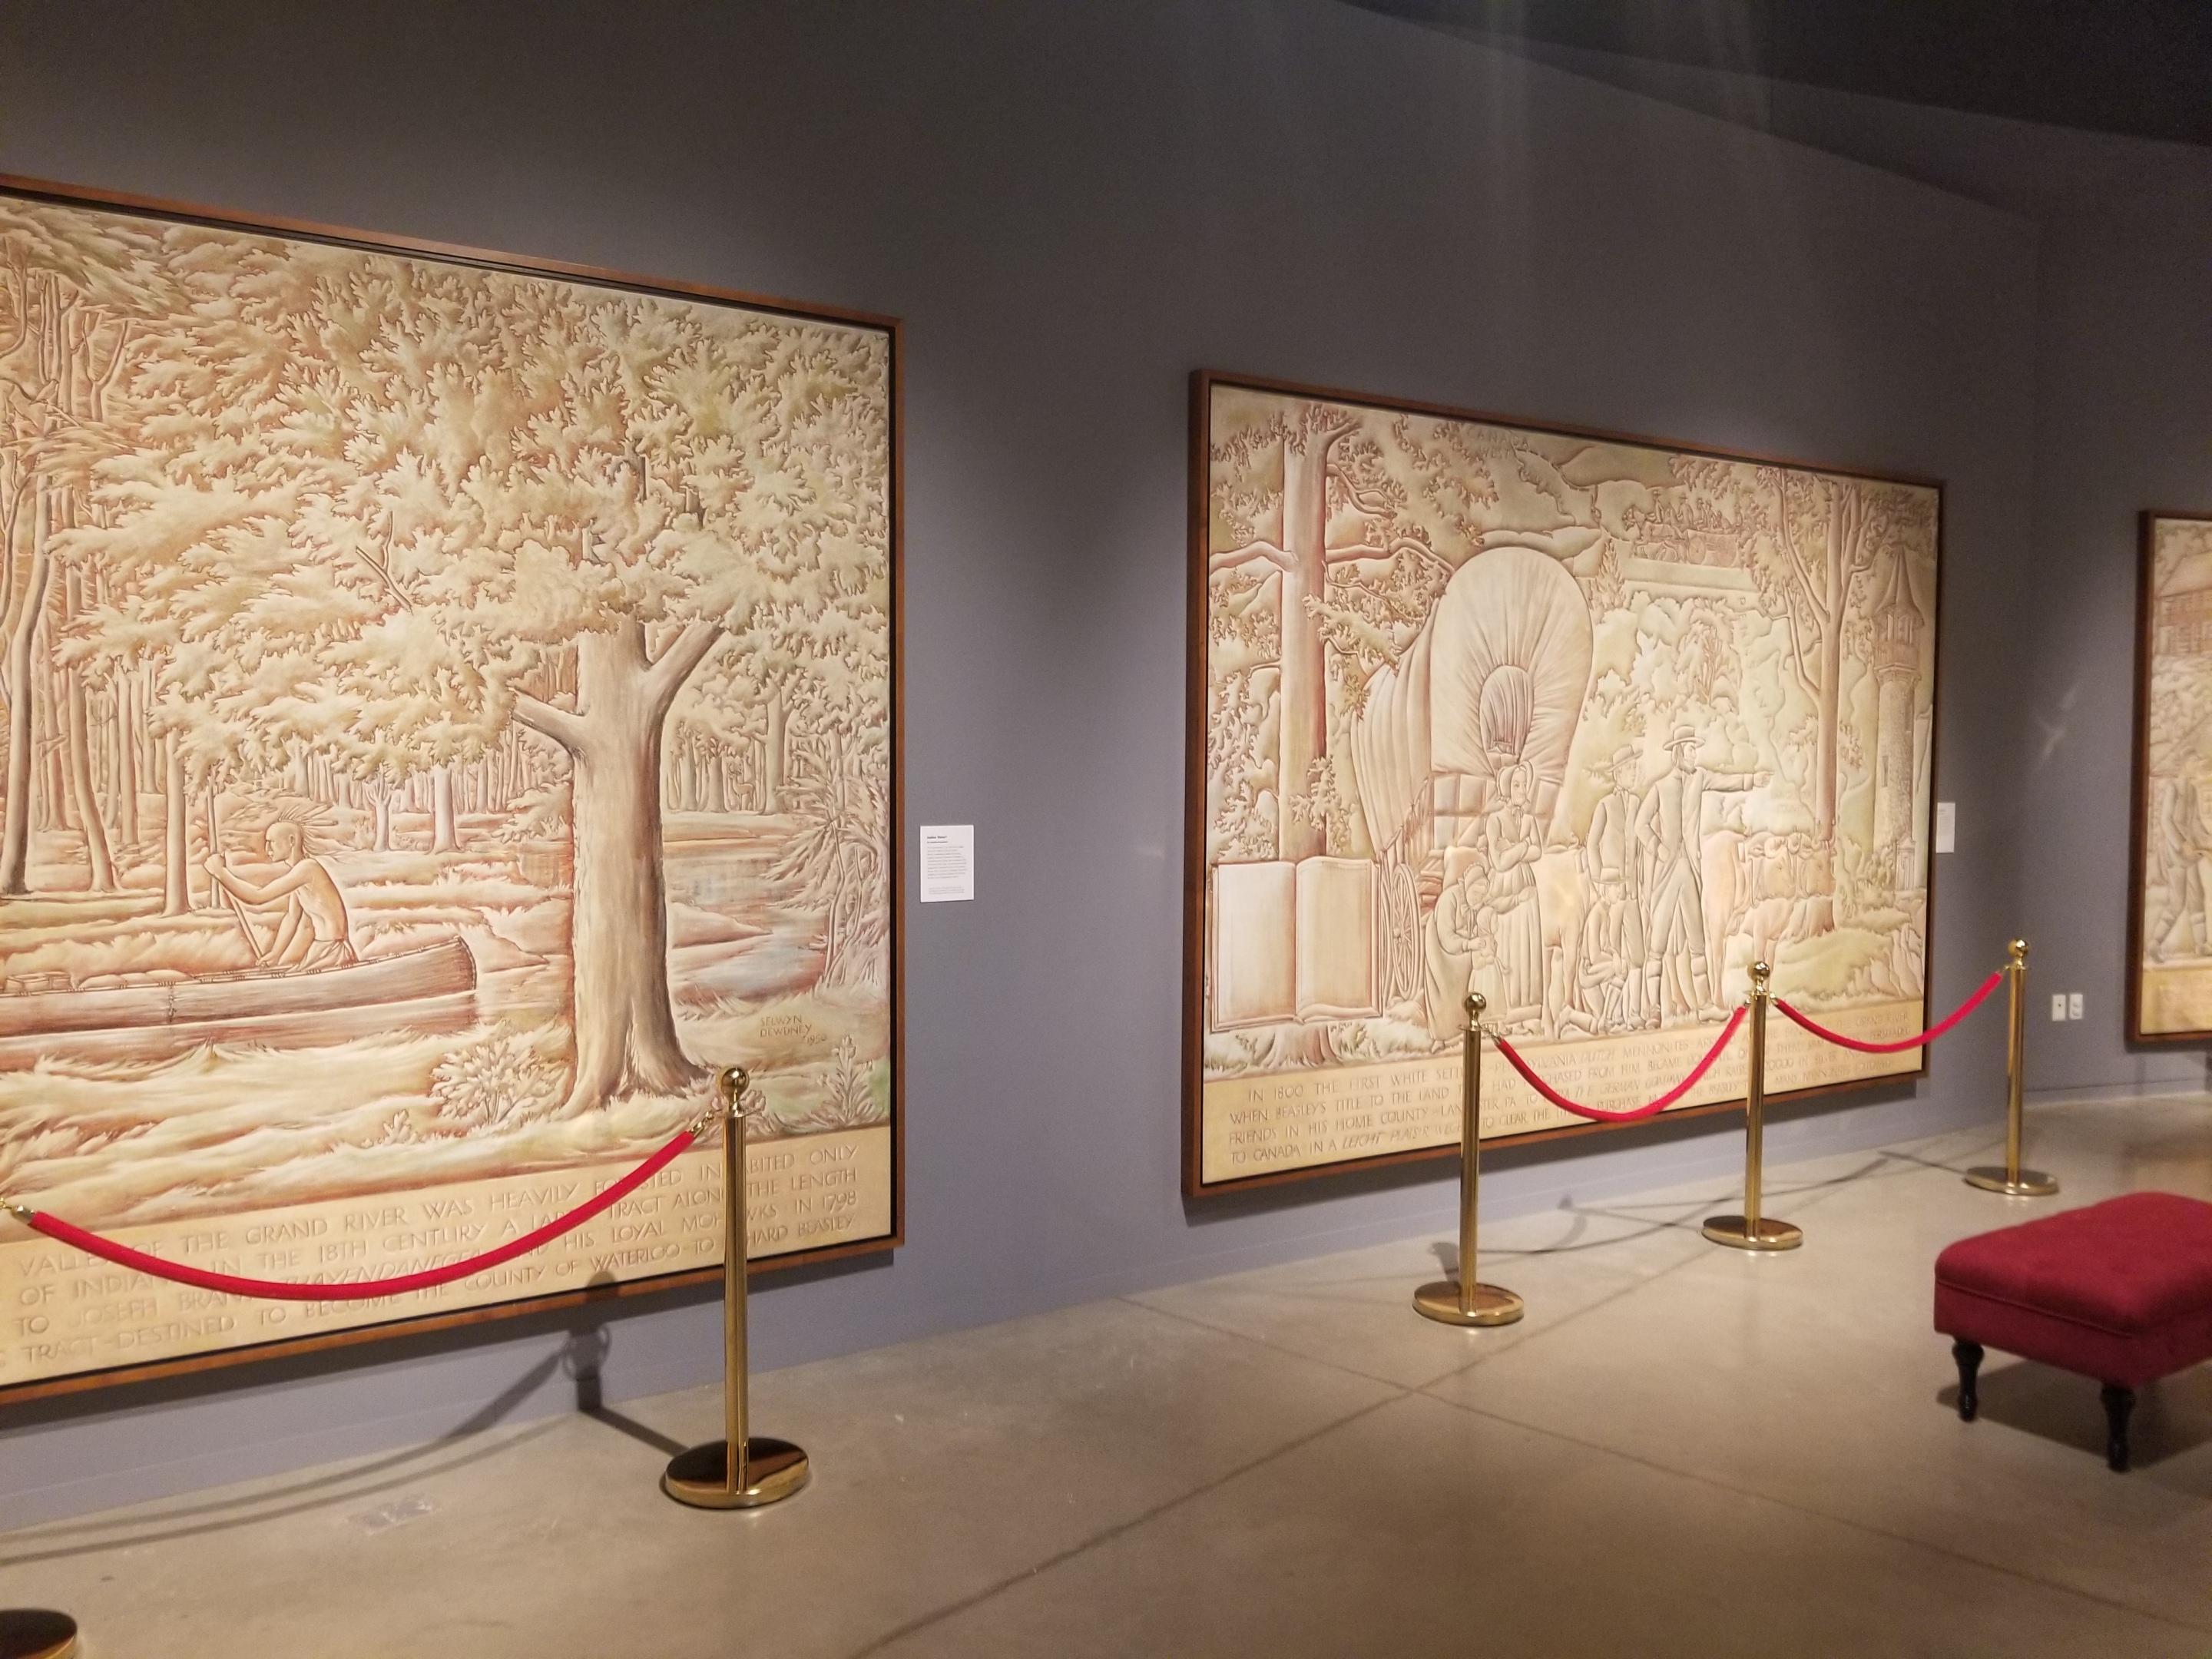 A series of murals painted by Selwyn Dewdney in 1950. The murals are two shades of brown and depict a man in a canoe and a family with a covered wagon